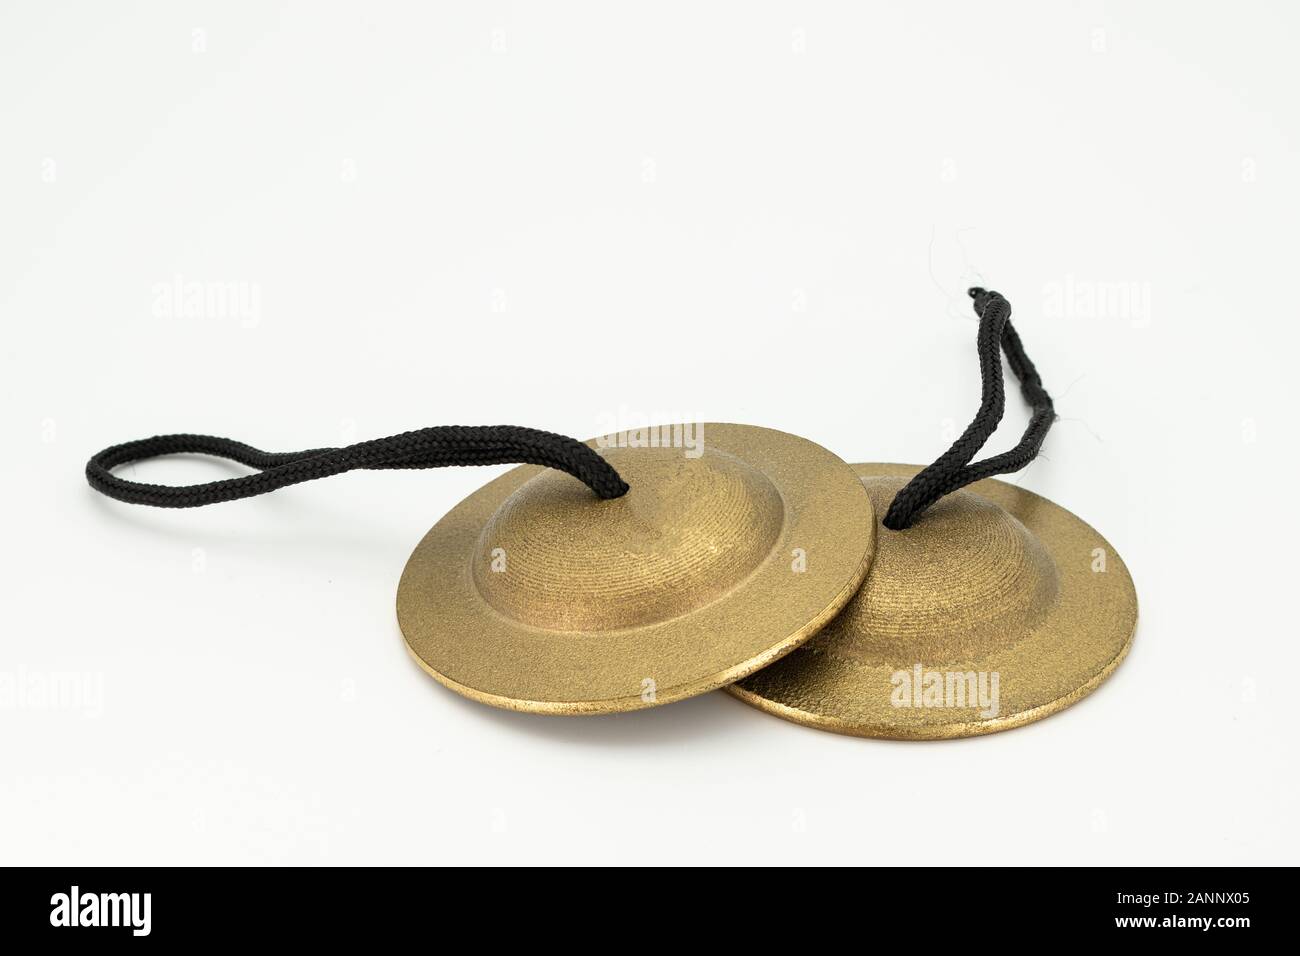 Closeup of a pair of finger cymbals lying on a white underground Stock Photo